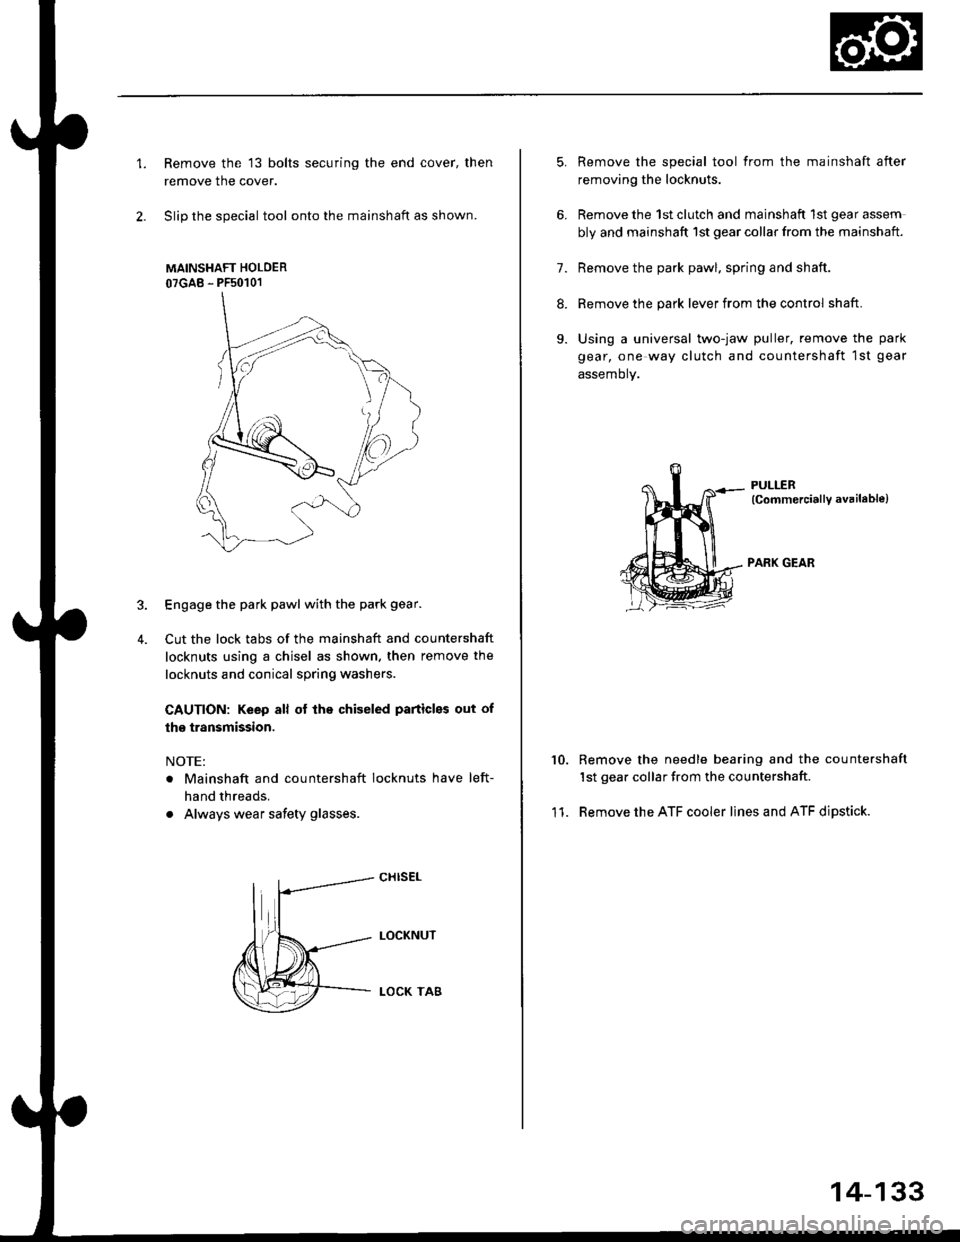 HONDA CIVIC 1996 6.G Workshop Manual 1.Remove the 13 bolts securing the end cover, then
remove the cover.
Slip the special tool onto the mainshaft as shown.
MAINSHAFT HOLOER
07GAB - PFs0101
Engage the park pawl with the park gear.
Cut th